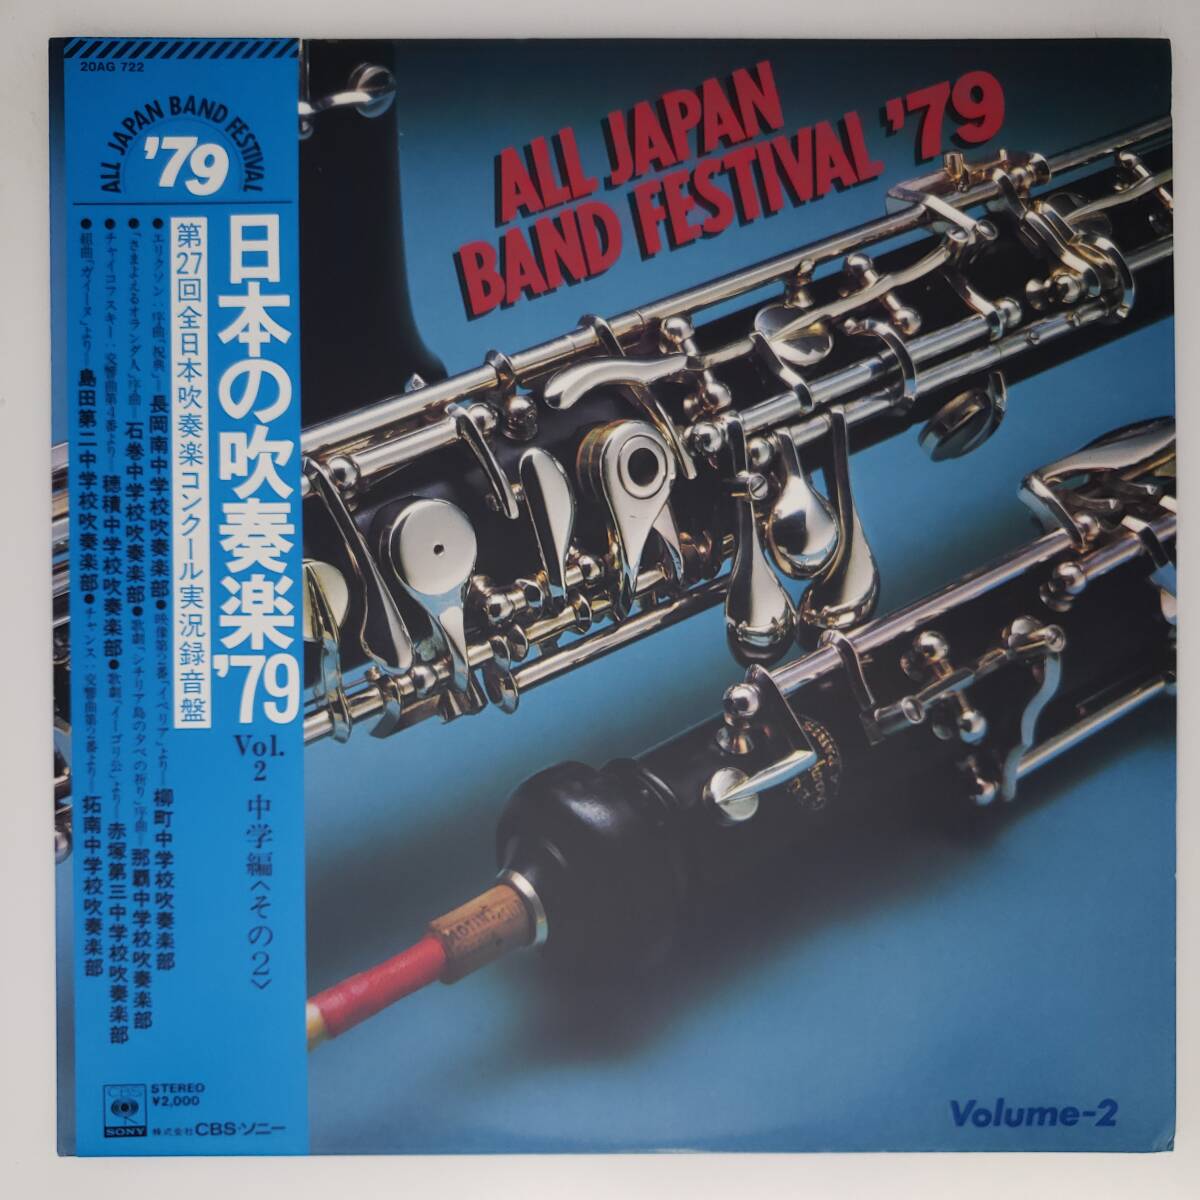  good record shop *LP* japanese wind instrumental music *1979 Vol.2* middle . compilation < that 2>* no. 27 times all Japan wind instrumental music navy blue cool real . recording record *C11452